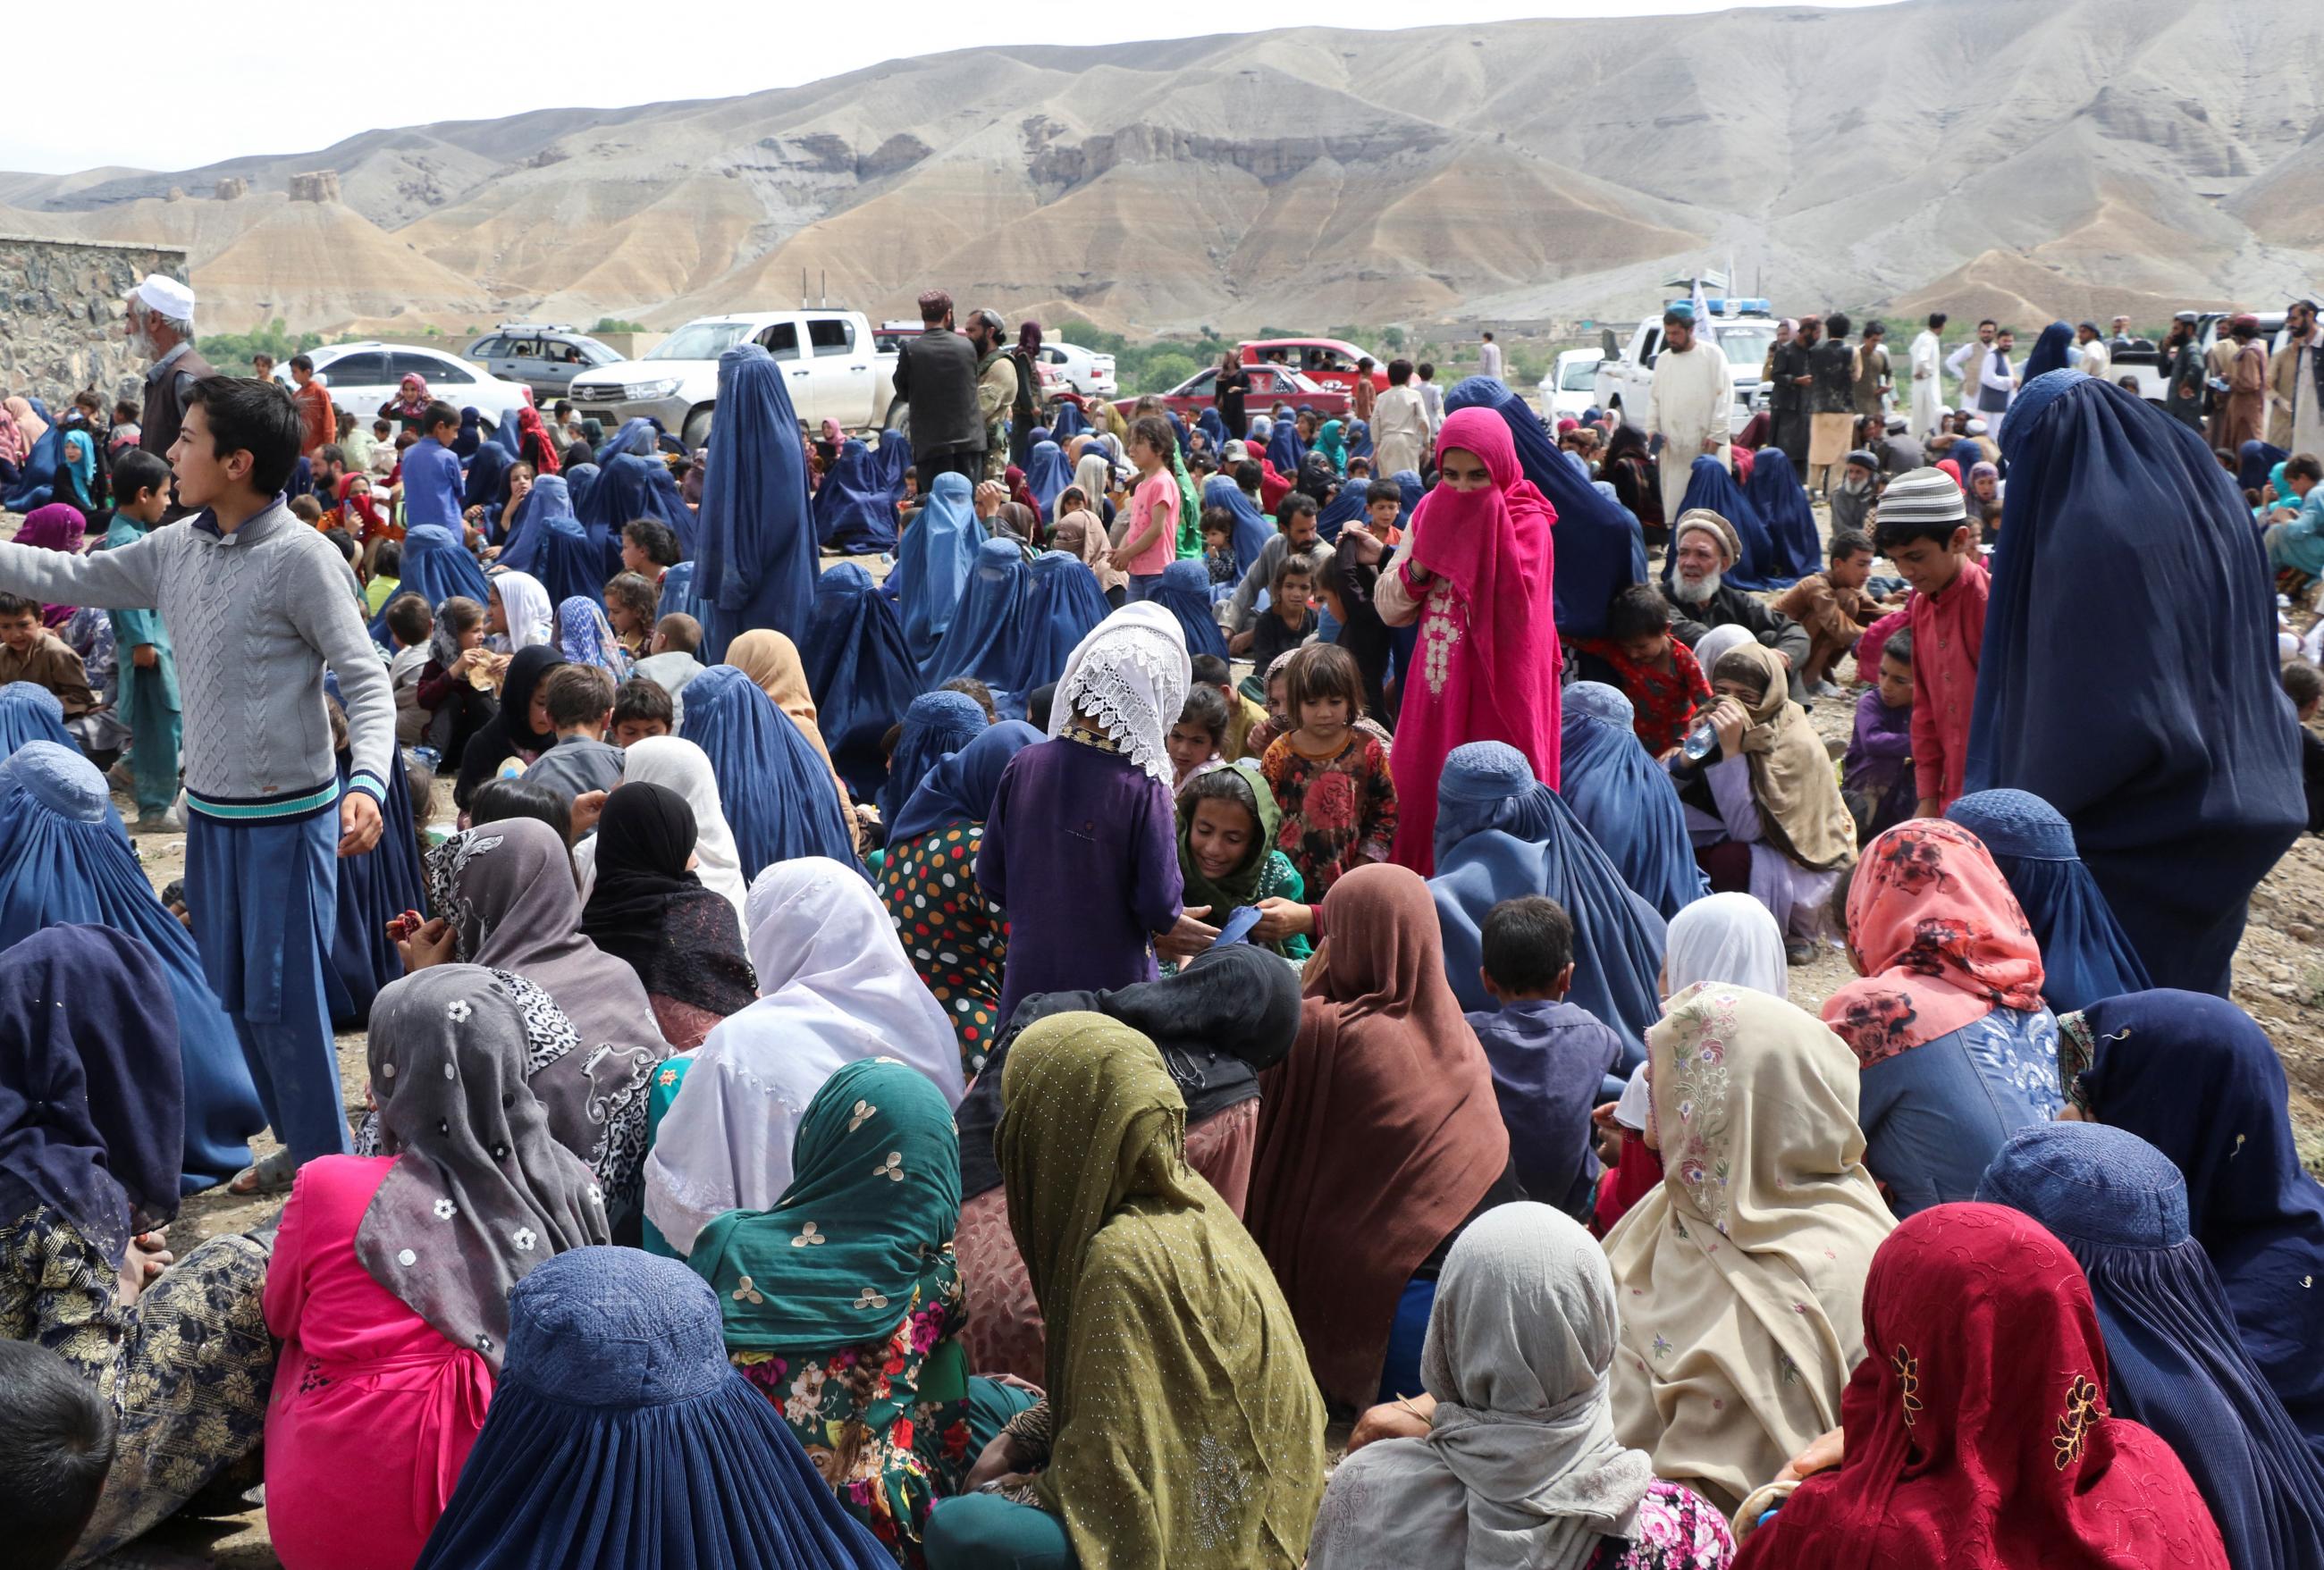 A crowd of displaced Afghan families in blue and pink clothing spend time together after the heavy flood in the Khushi district of Logar, Afghanistan. In the background, mountains rise up from the horizon.